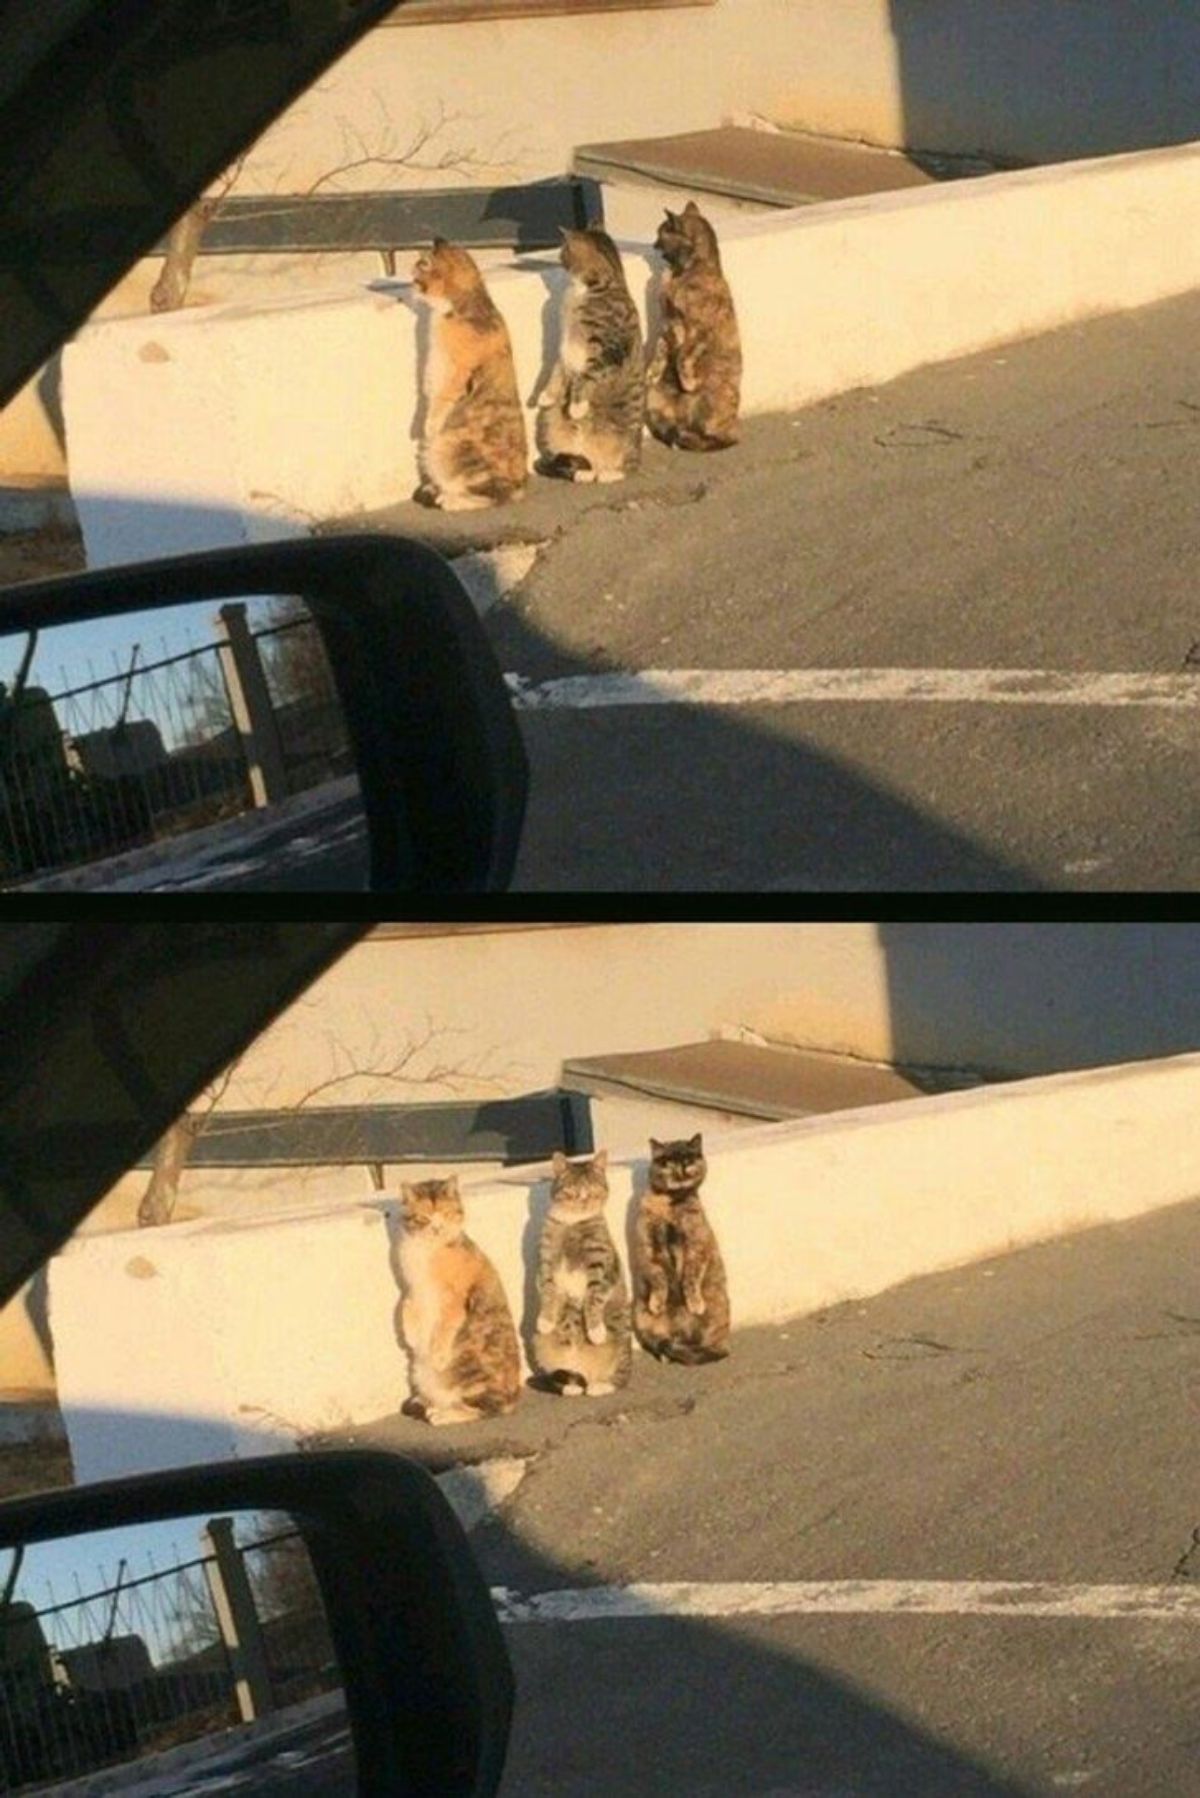 2 photos of three cats standing on their hind legs and looking over a wall then turning around to look at the camera